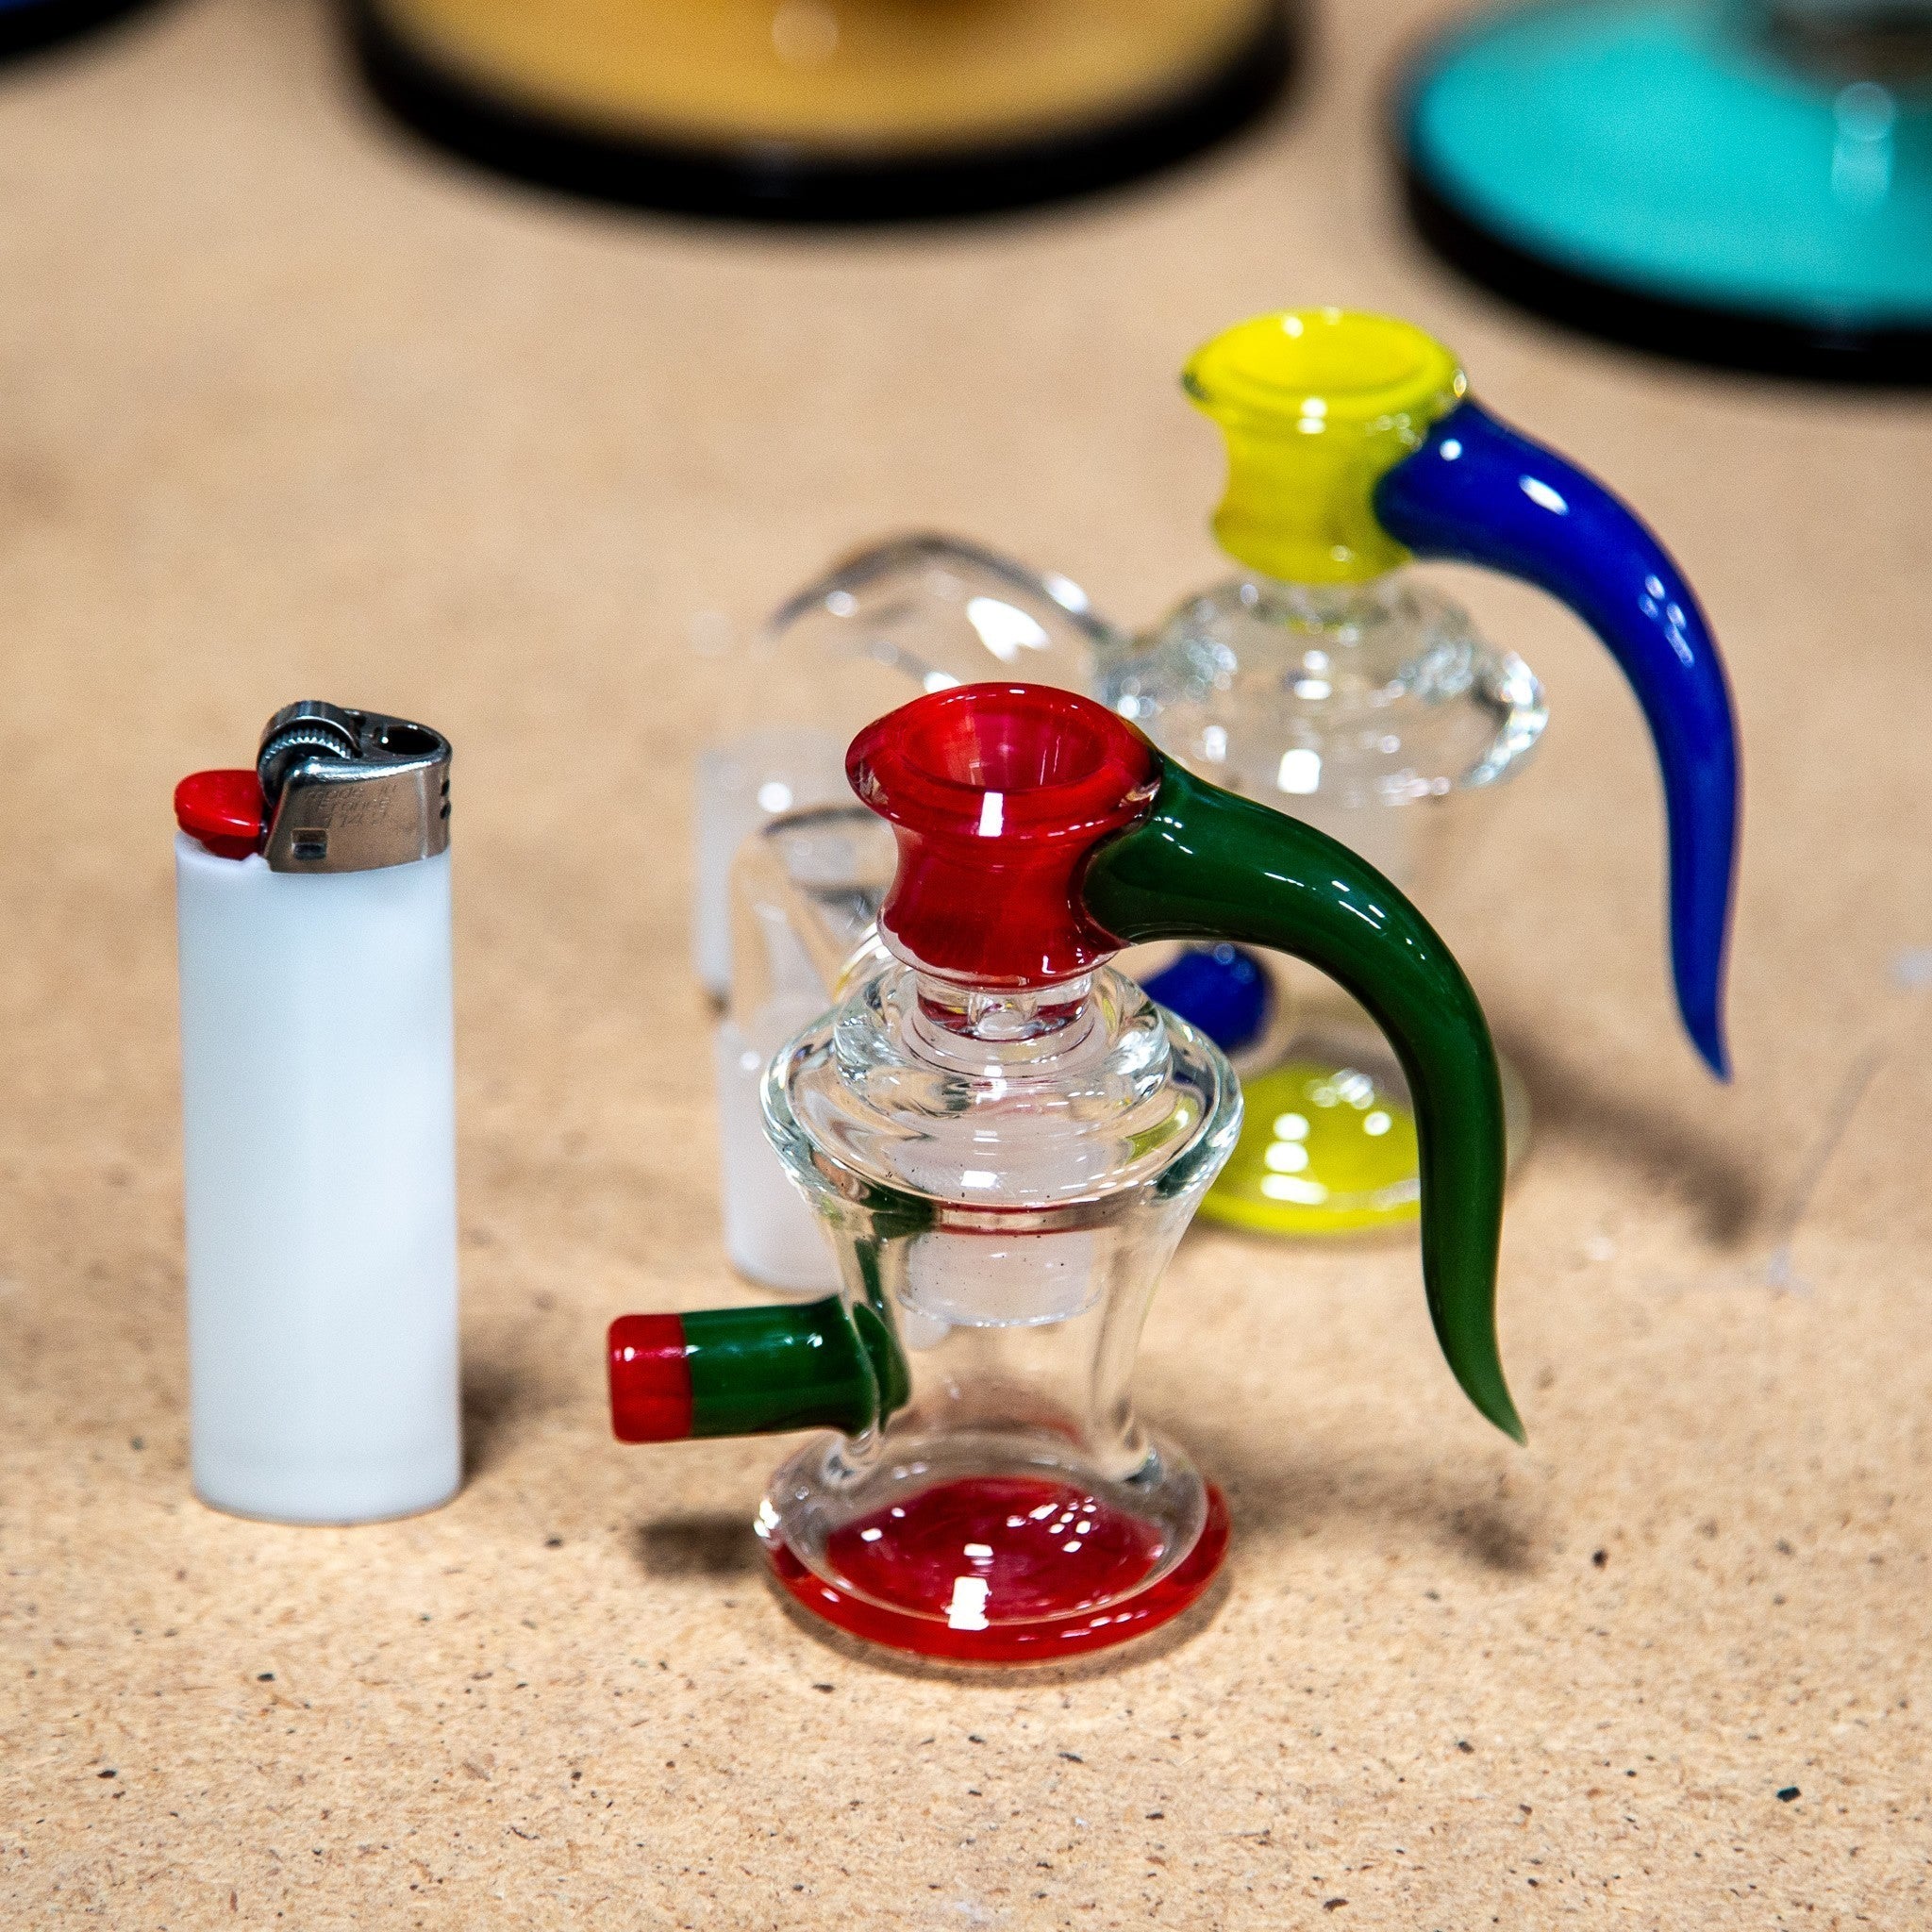 Worked Ash Catcher Set 18mm Blue Yellow